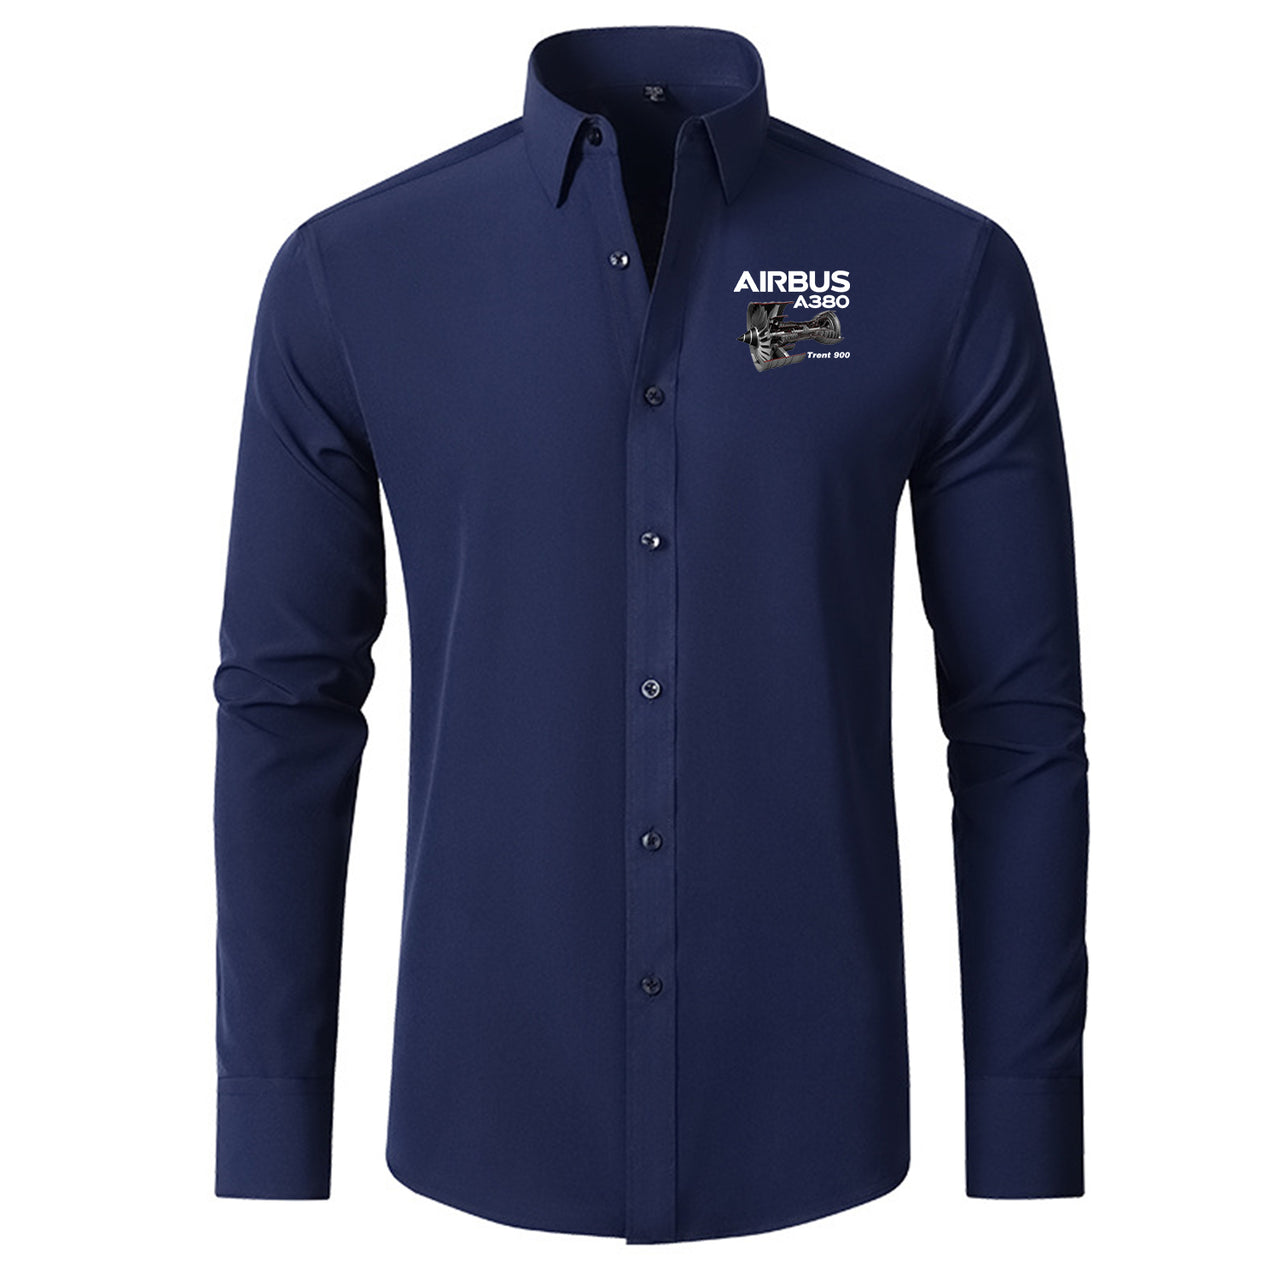 Airbus A380 & Trent 900 Engine Designed Long Sleeve Shirts